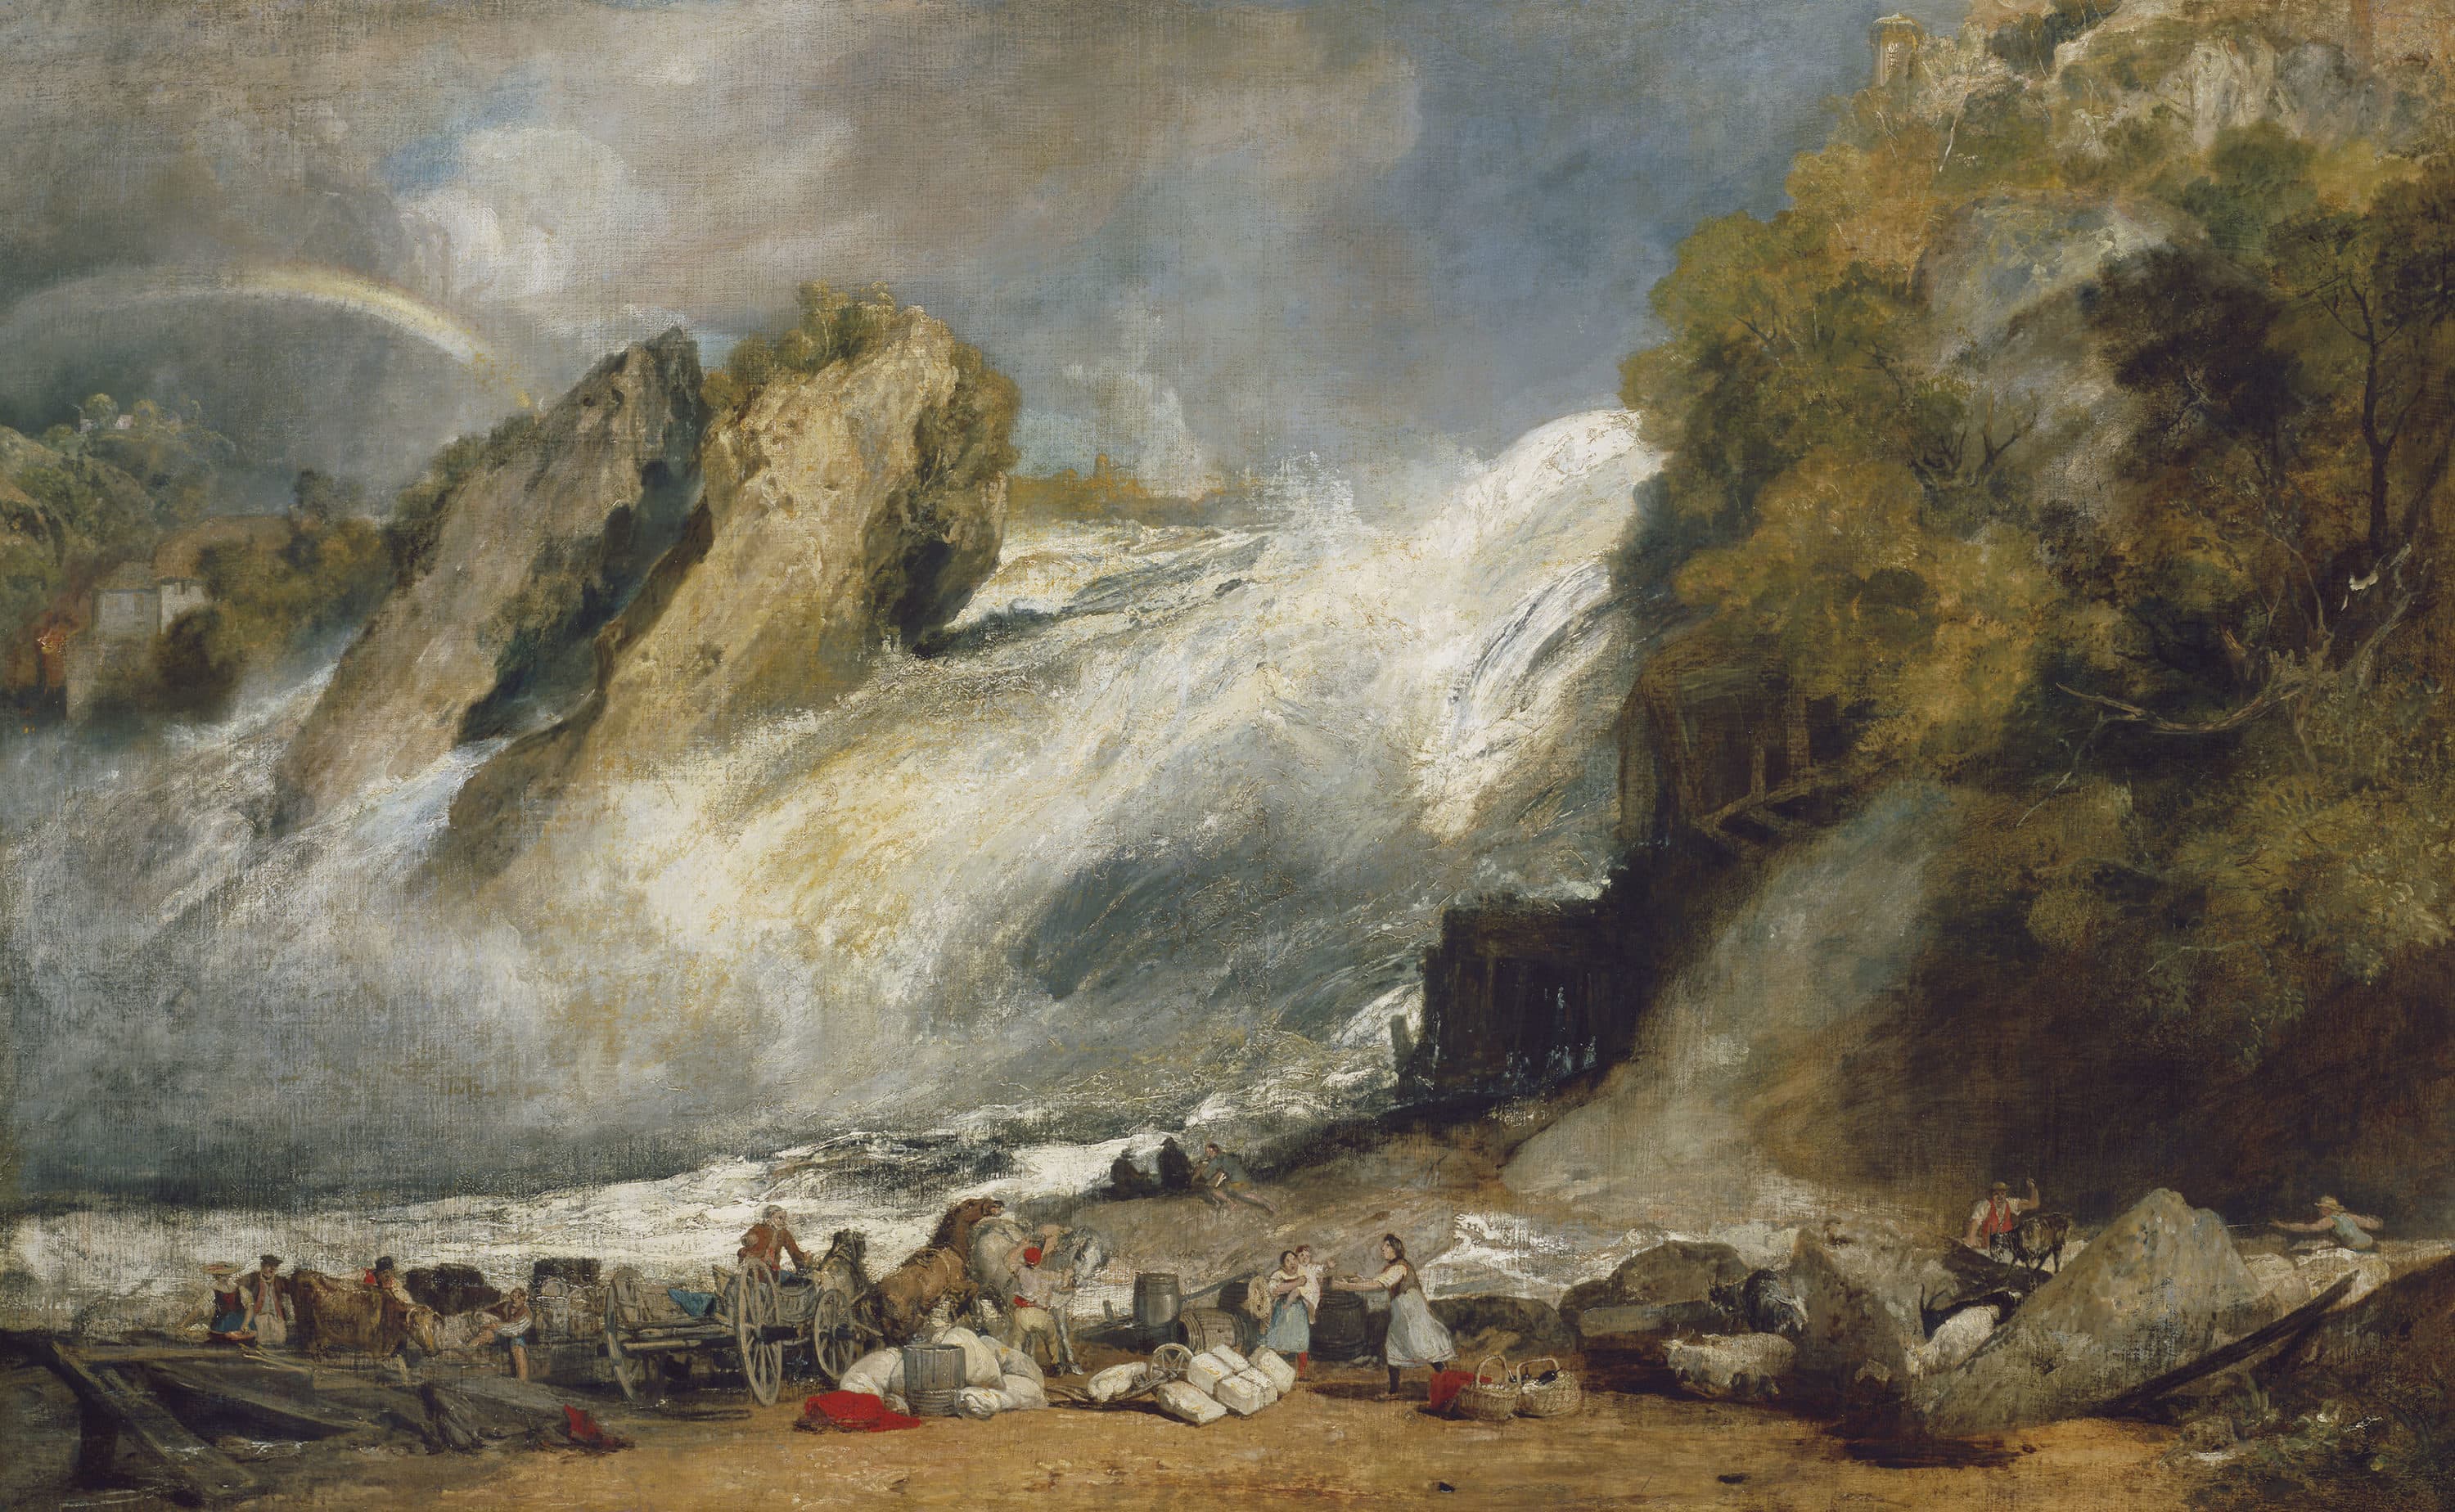 JMW Turner Paintings: One of the Most Important Modern Art Influences